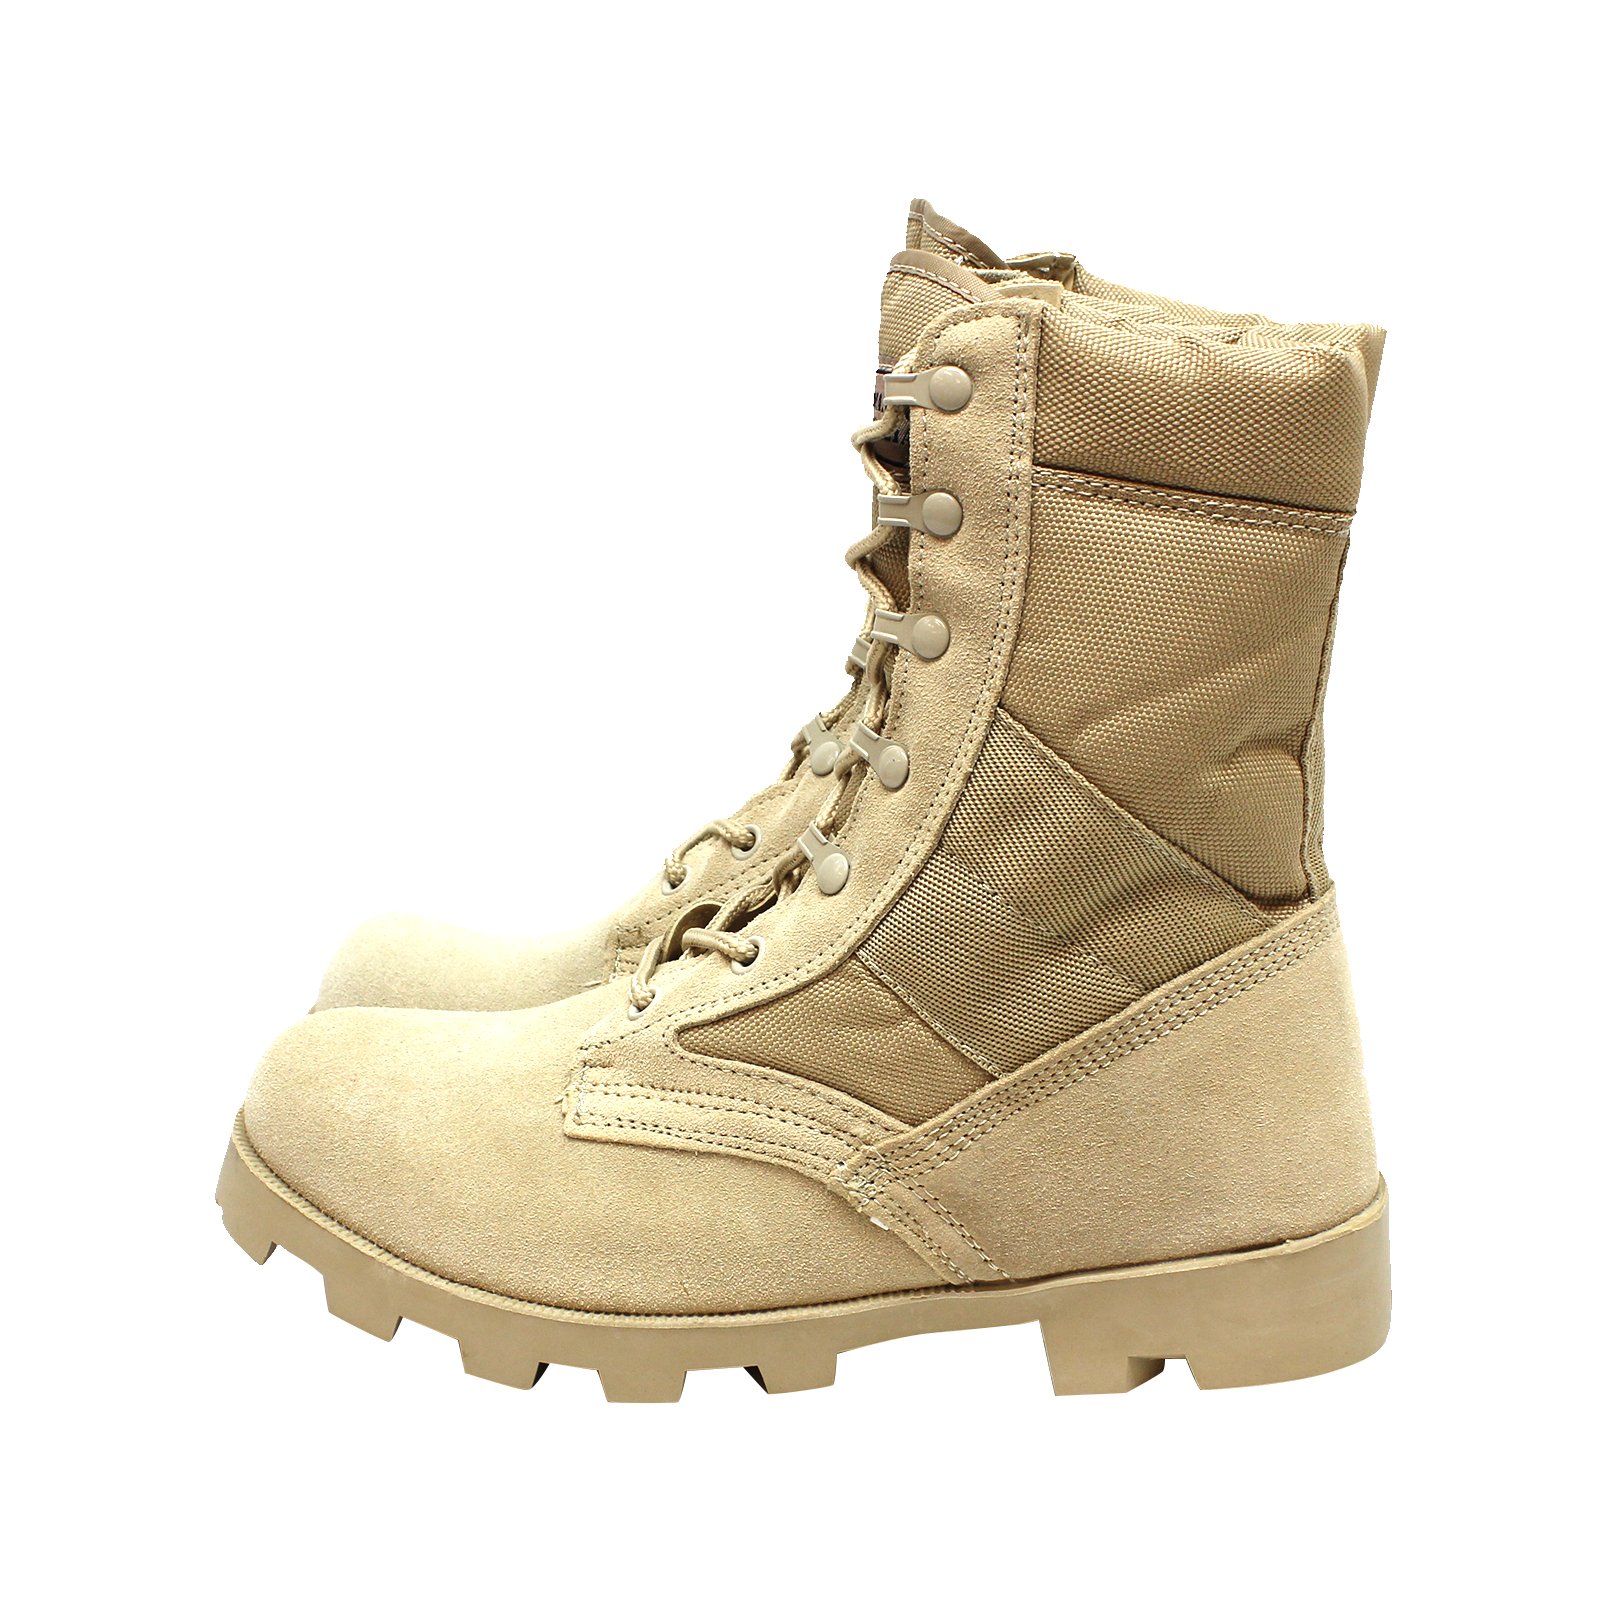 military spec boots